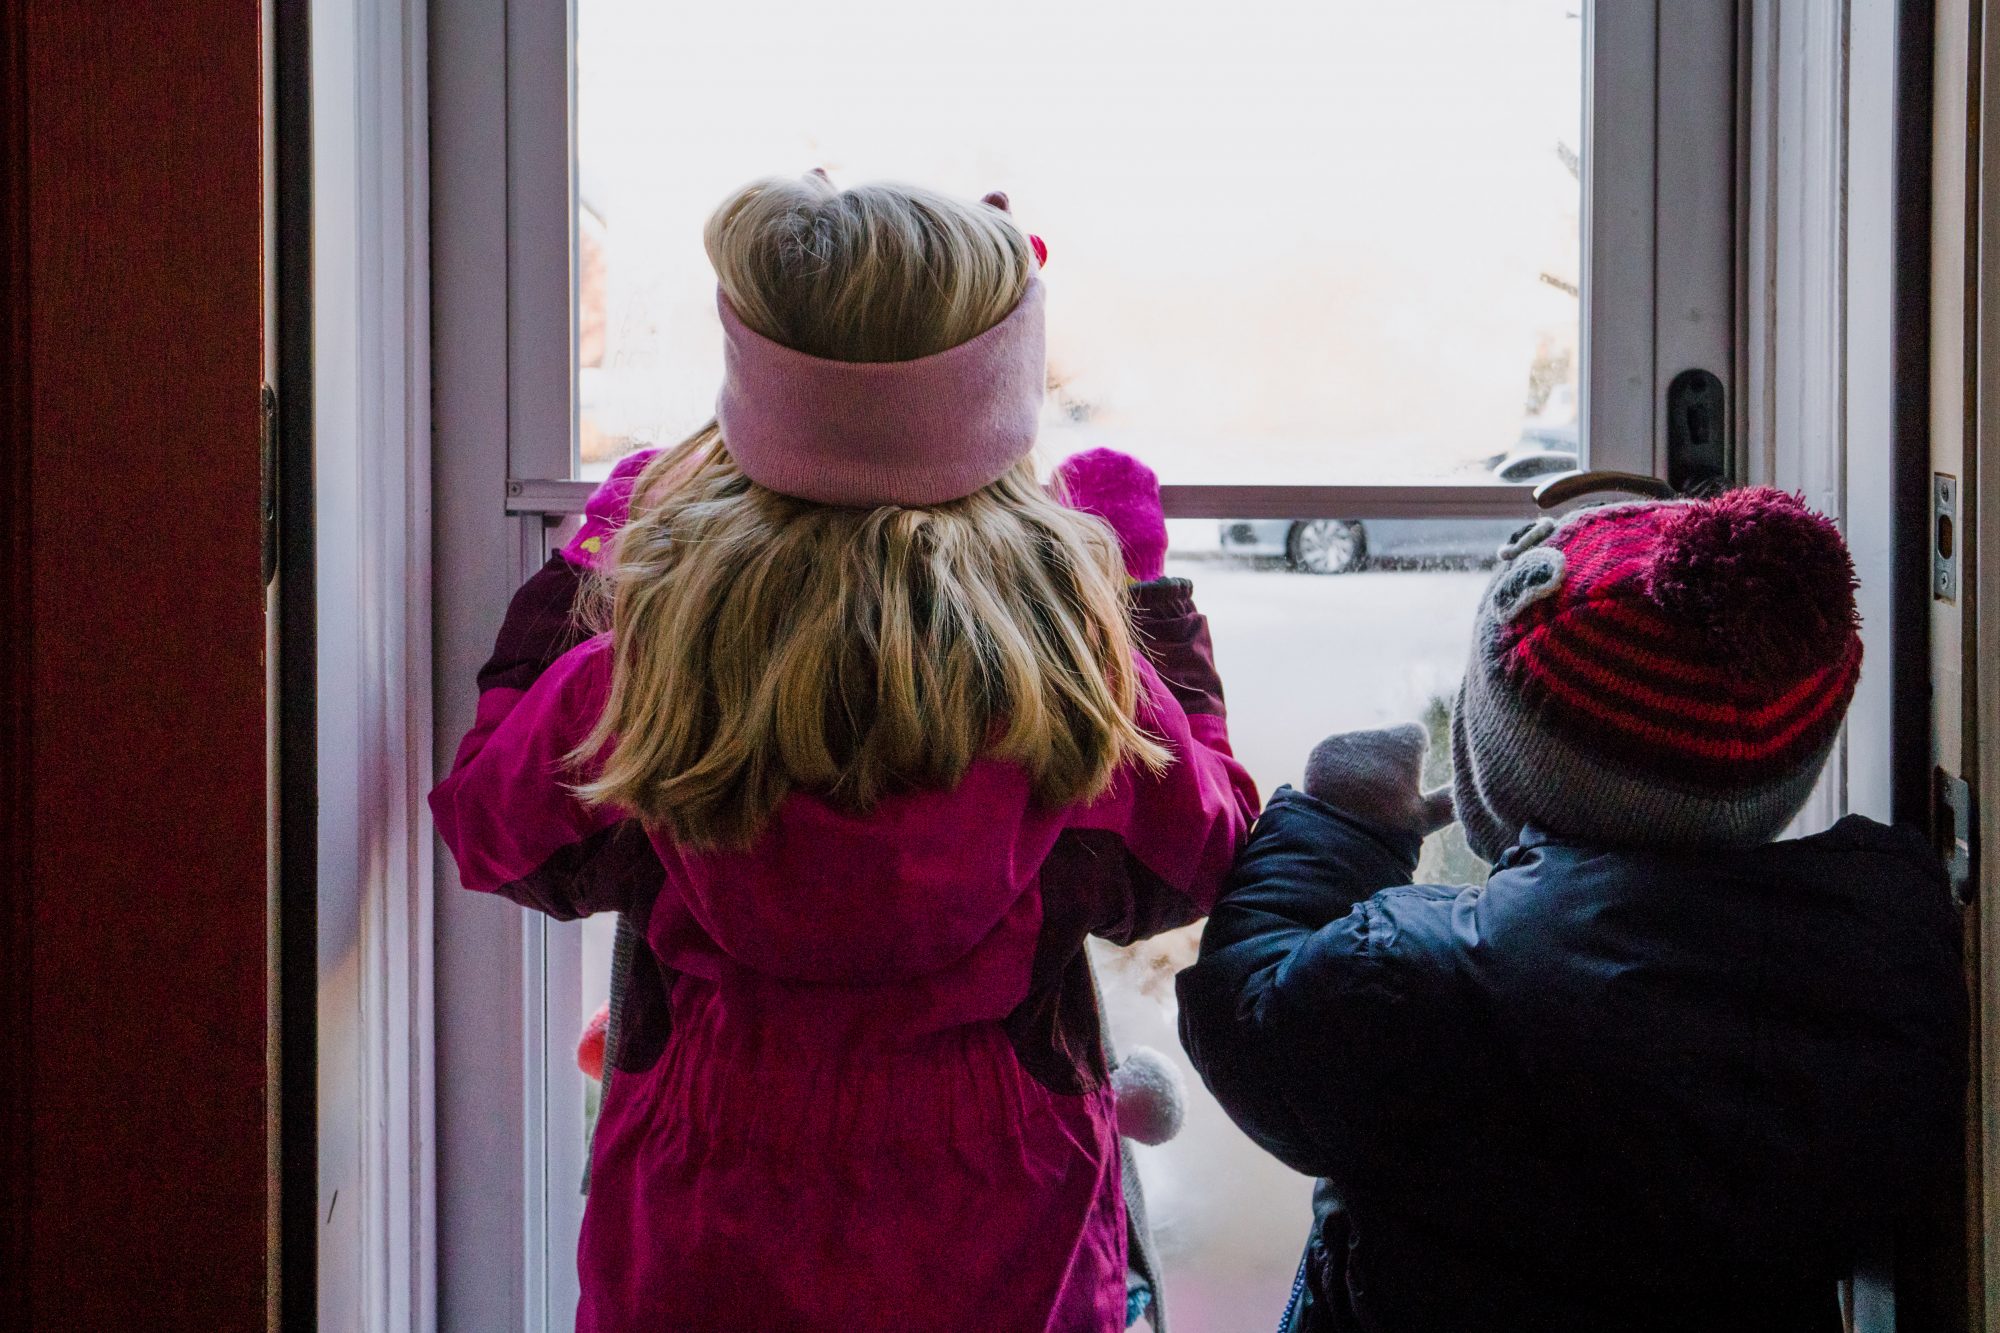 An image of children looking out a snowy window.